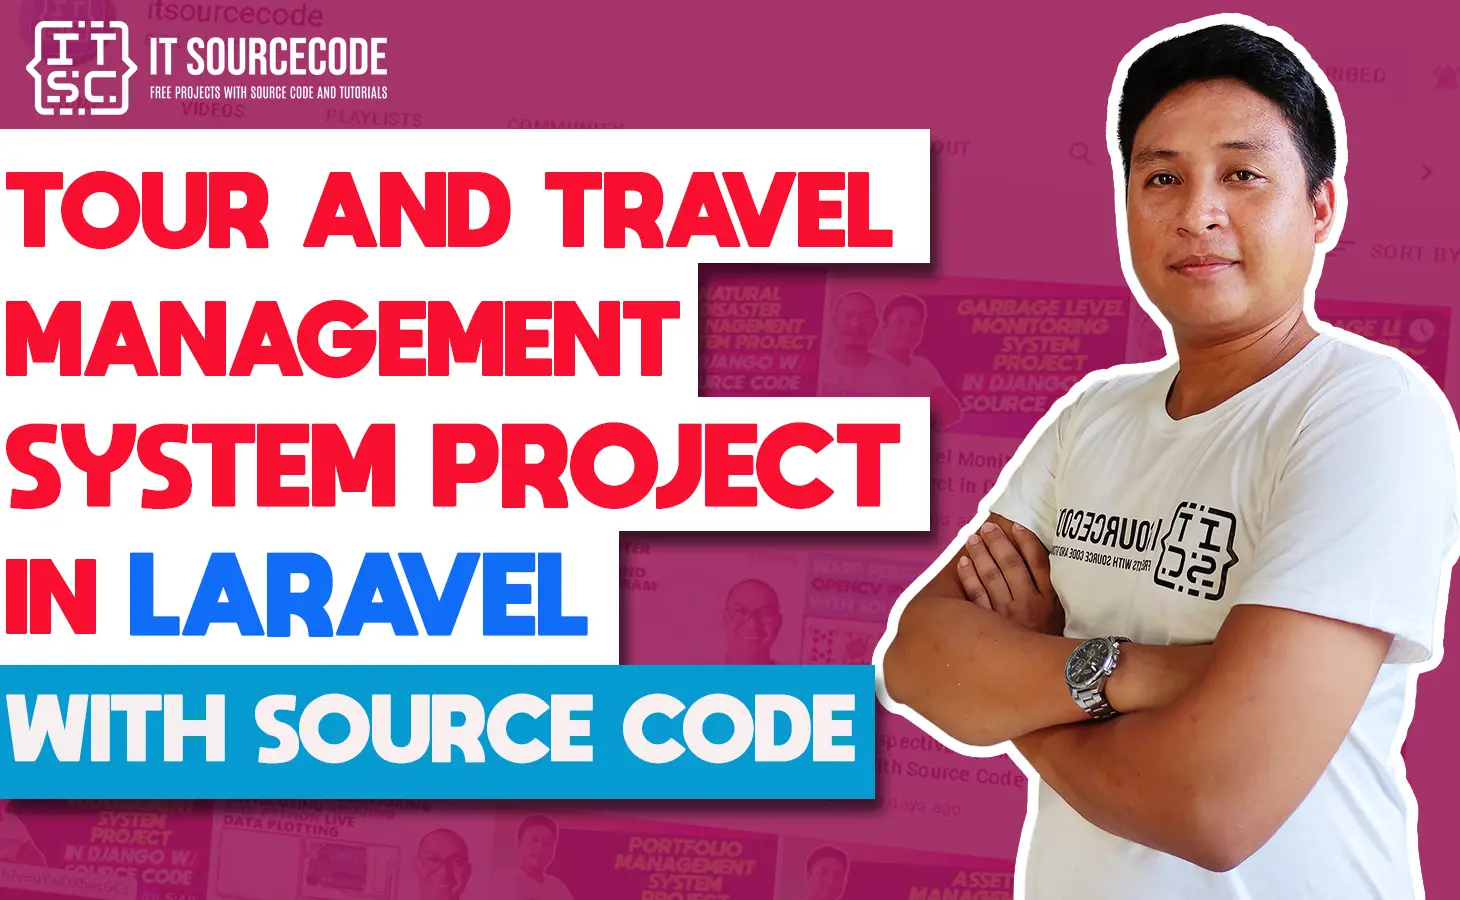 Tour and Travel Management System Project in Laravel with Source Code